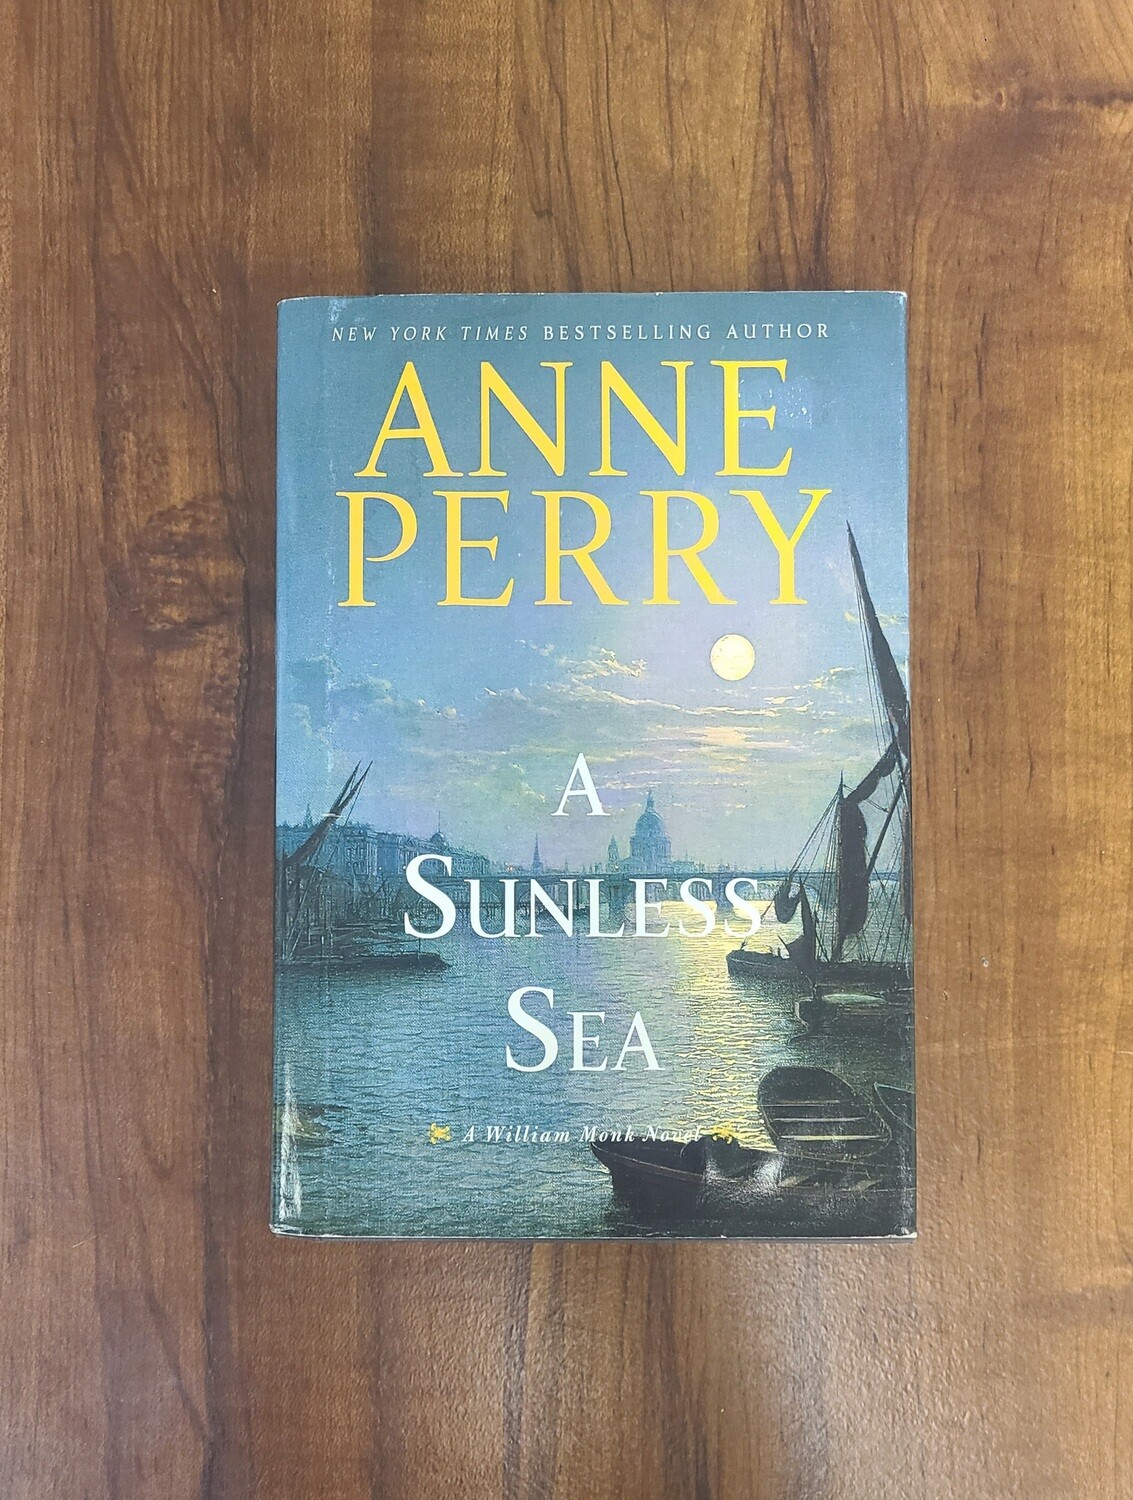 A Sunless Sea by Anne Perry